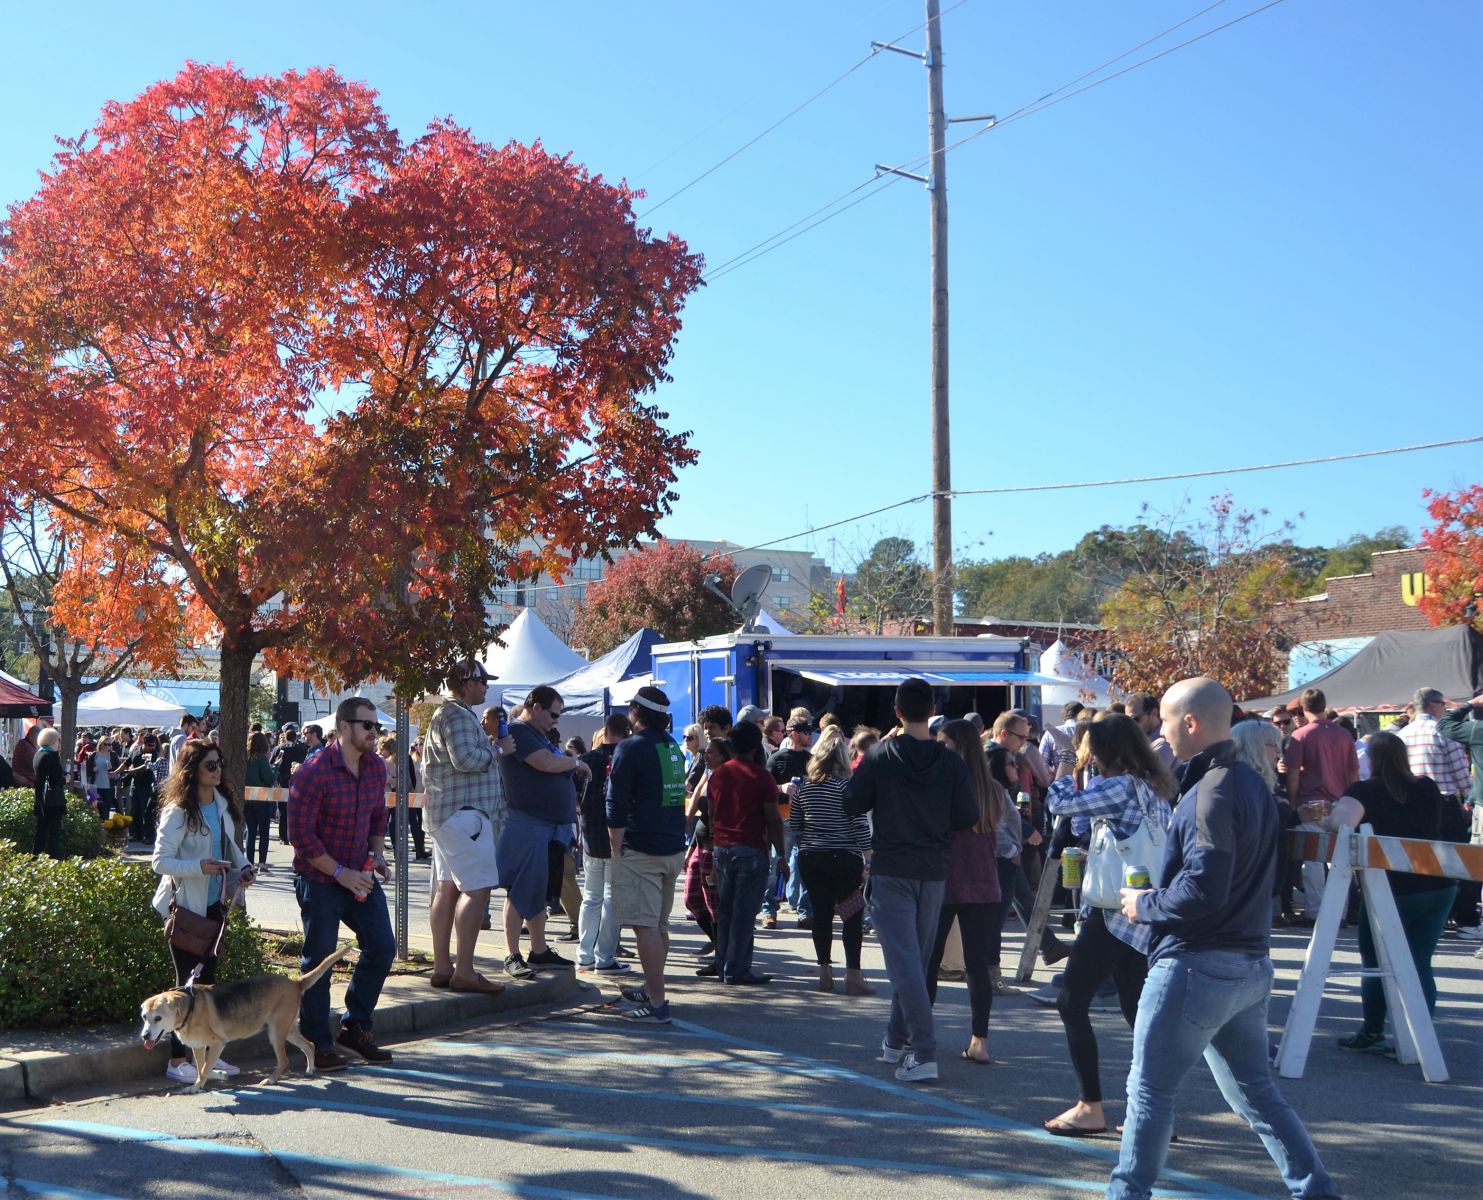 People and pets mingle at the 2018 Five Points Chili Cook-Off. The 32nd annual event is set for Oct. 26. (Photo/Melinda Waldrop)